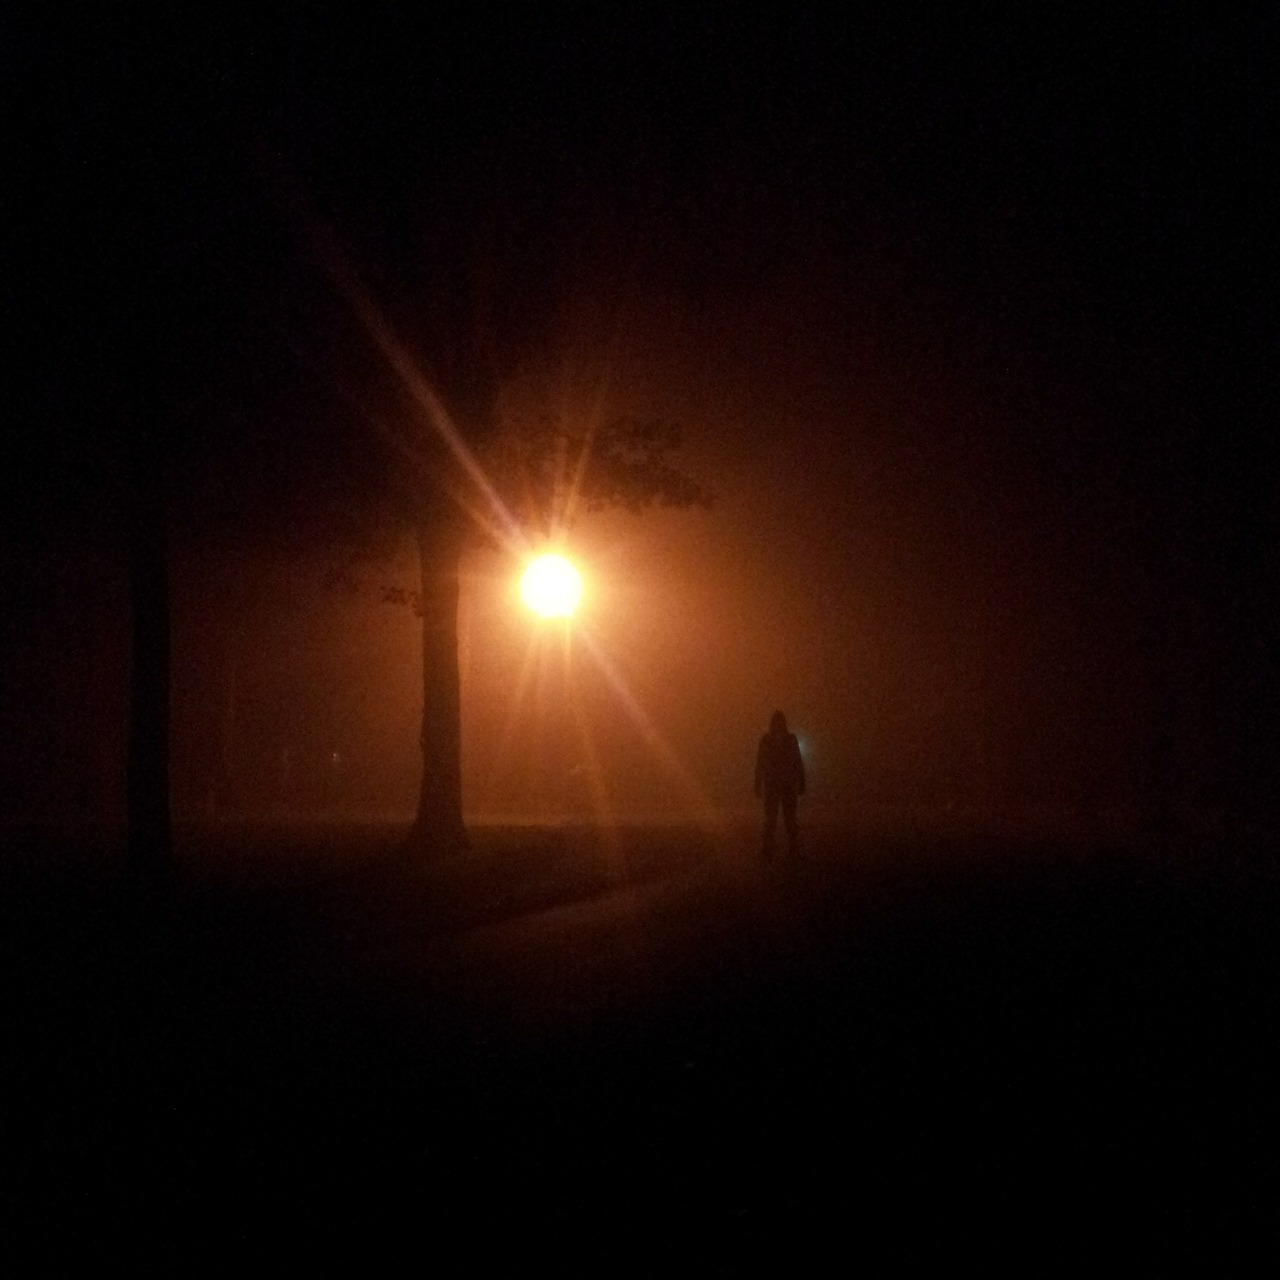 night stalker person free photo